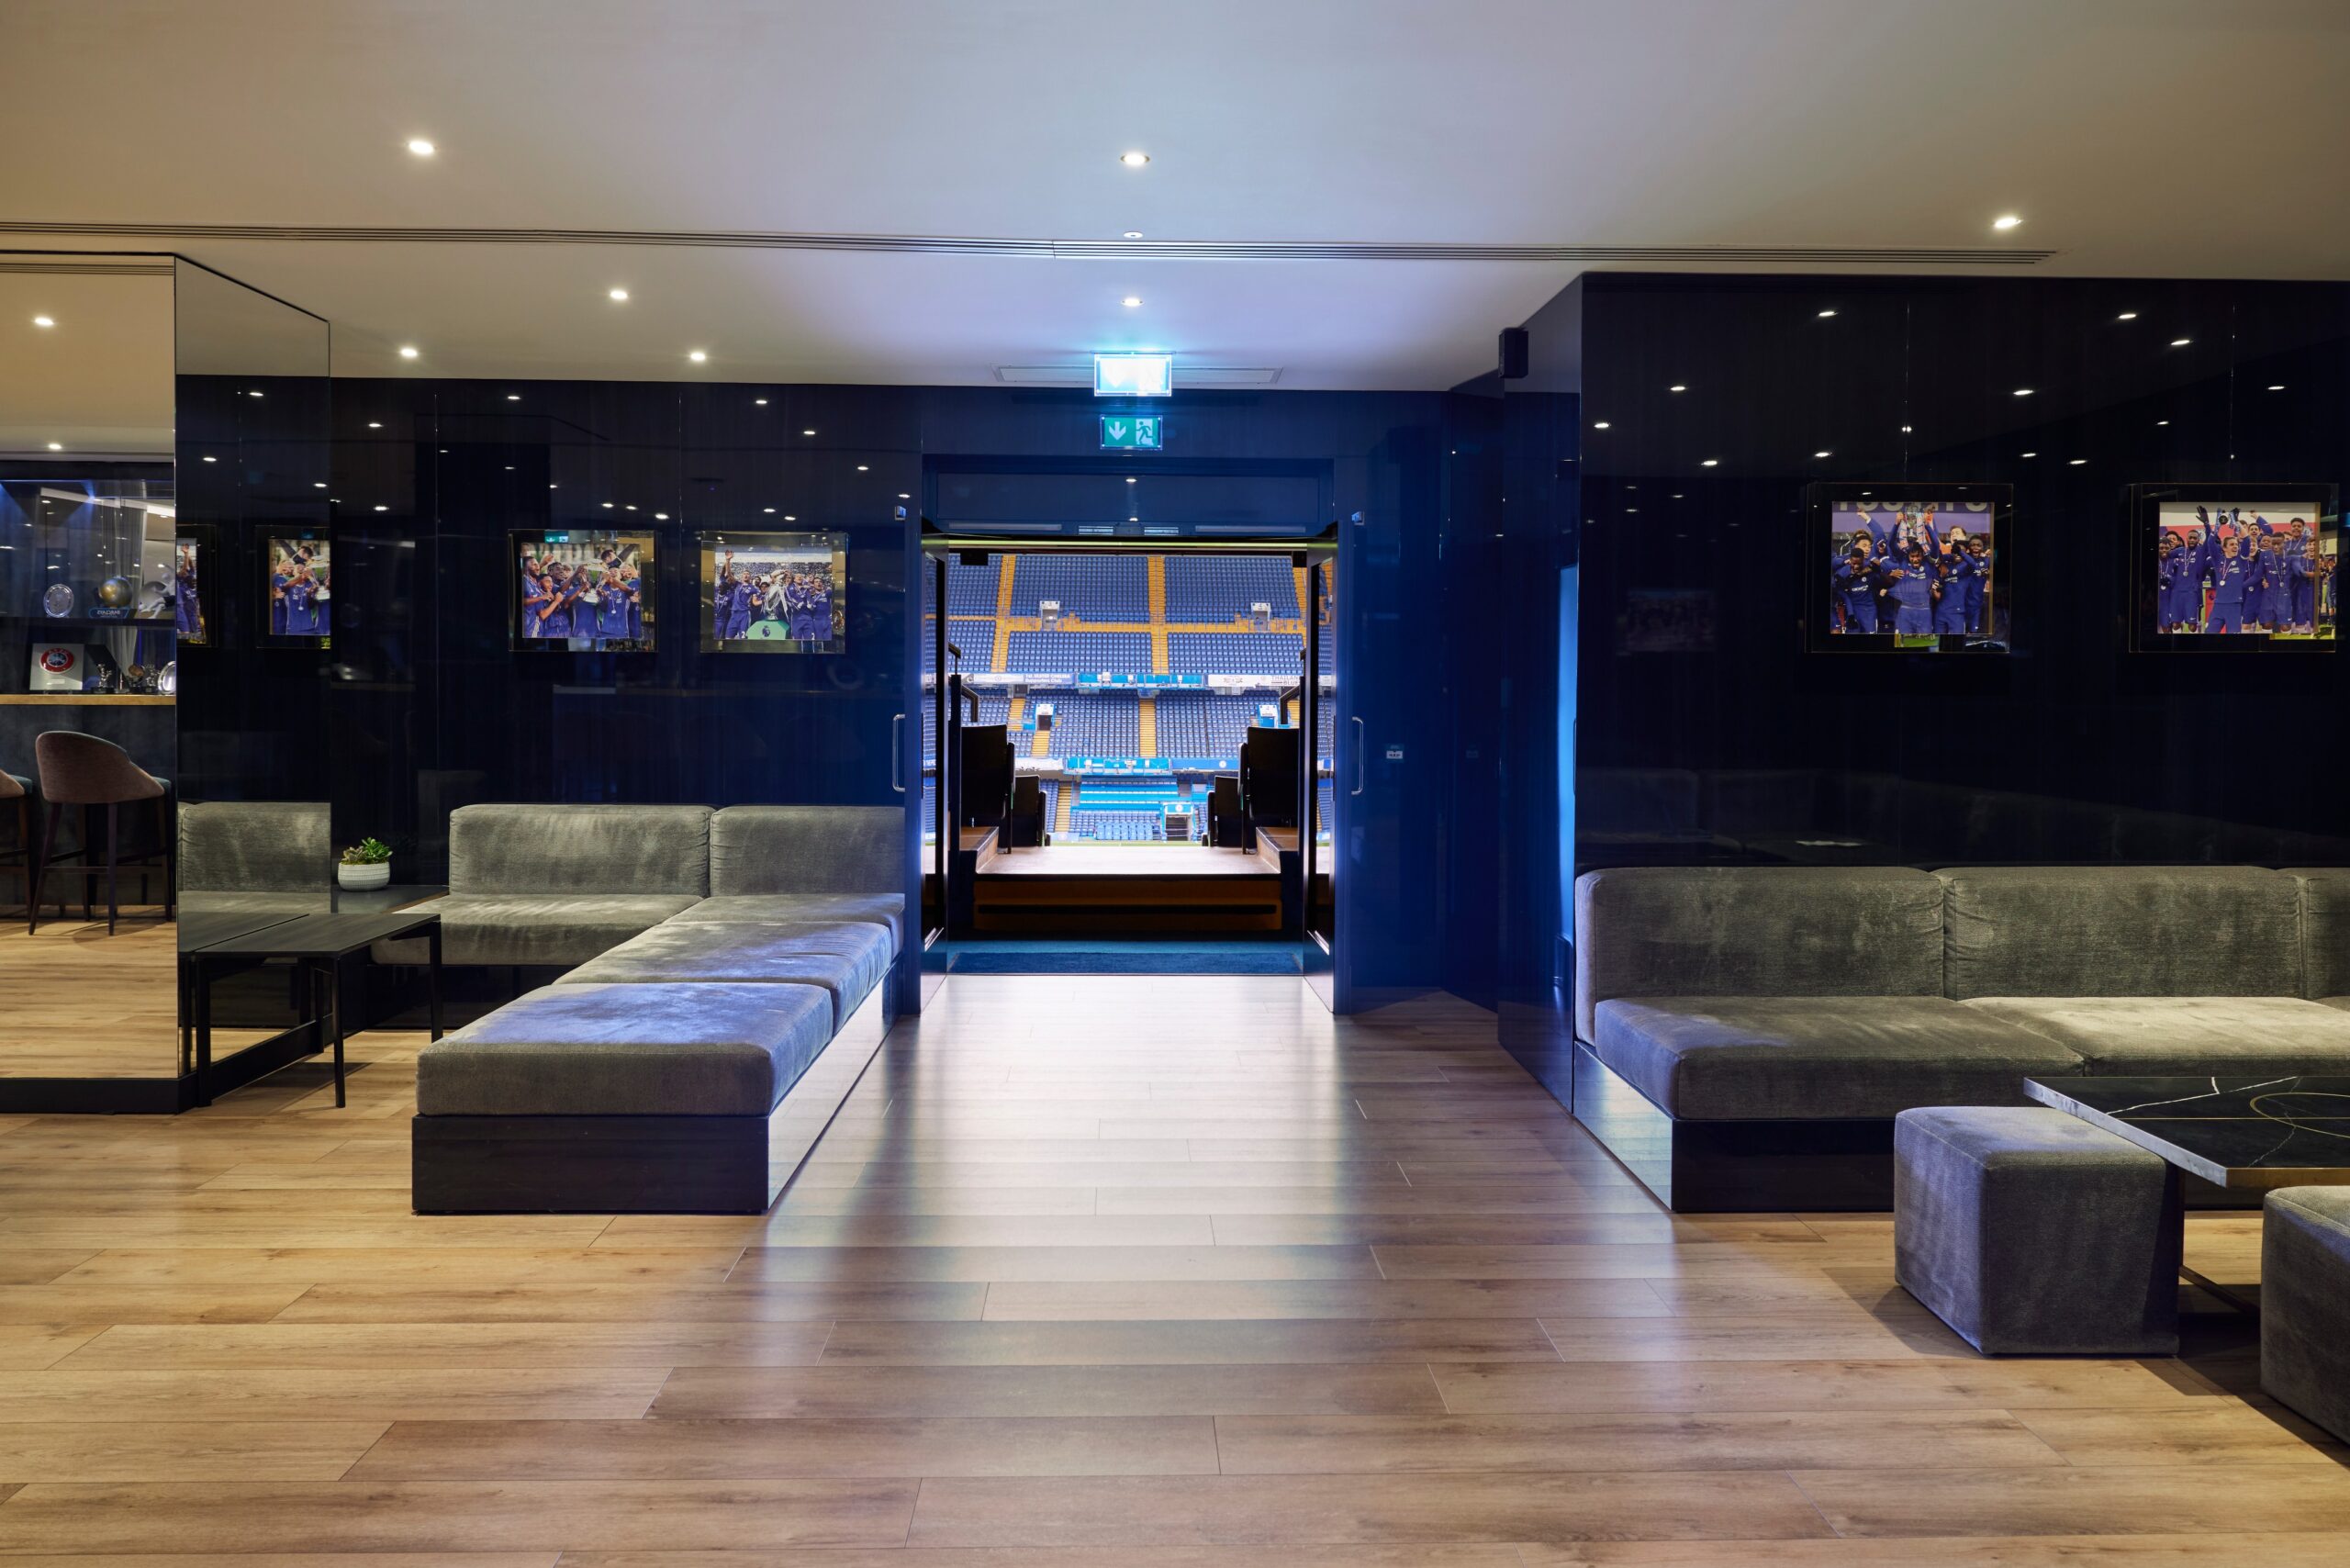 Tapestry-soho-frith-street-chelsea-football-club-client-kit-lauch-new-season-hospitality-shoot-location-production-house-photography-retouching-corporate-london-autumn-2023-sports-corporate